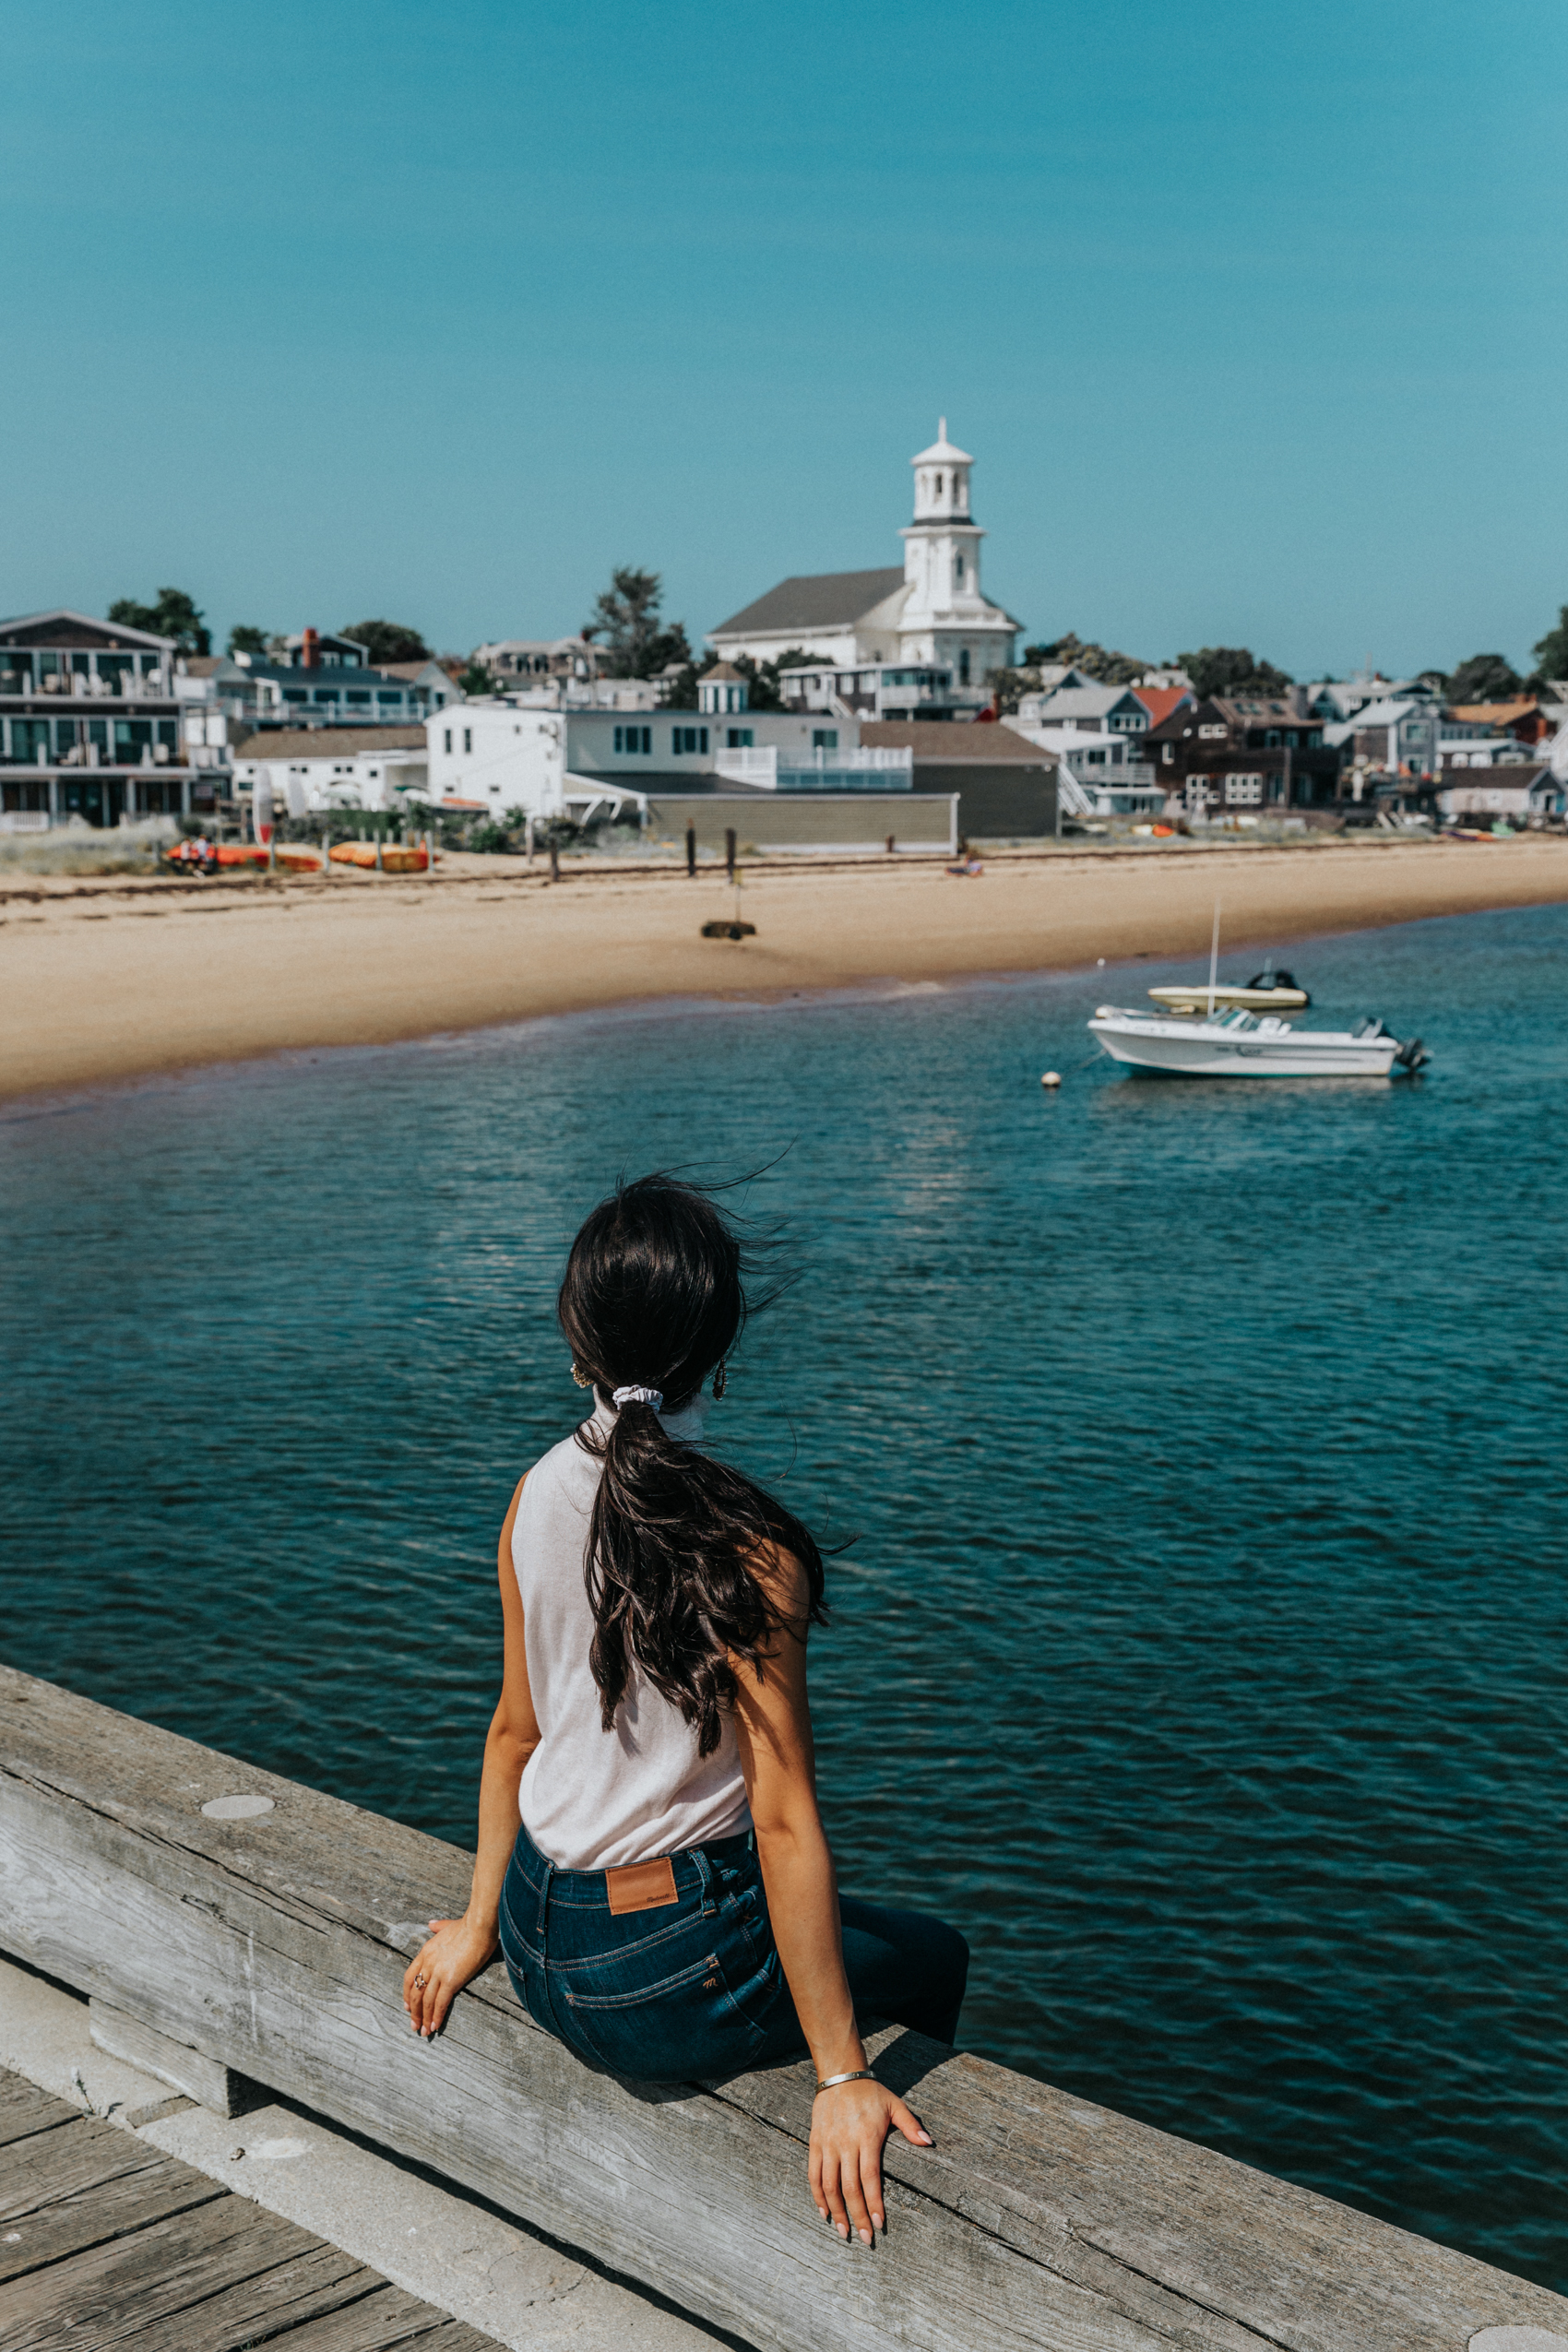 Five things to do in Provincetown, Massachusetts